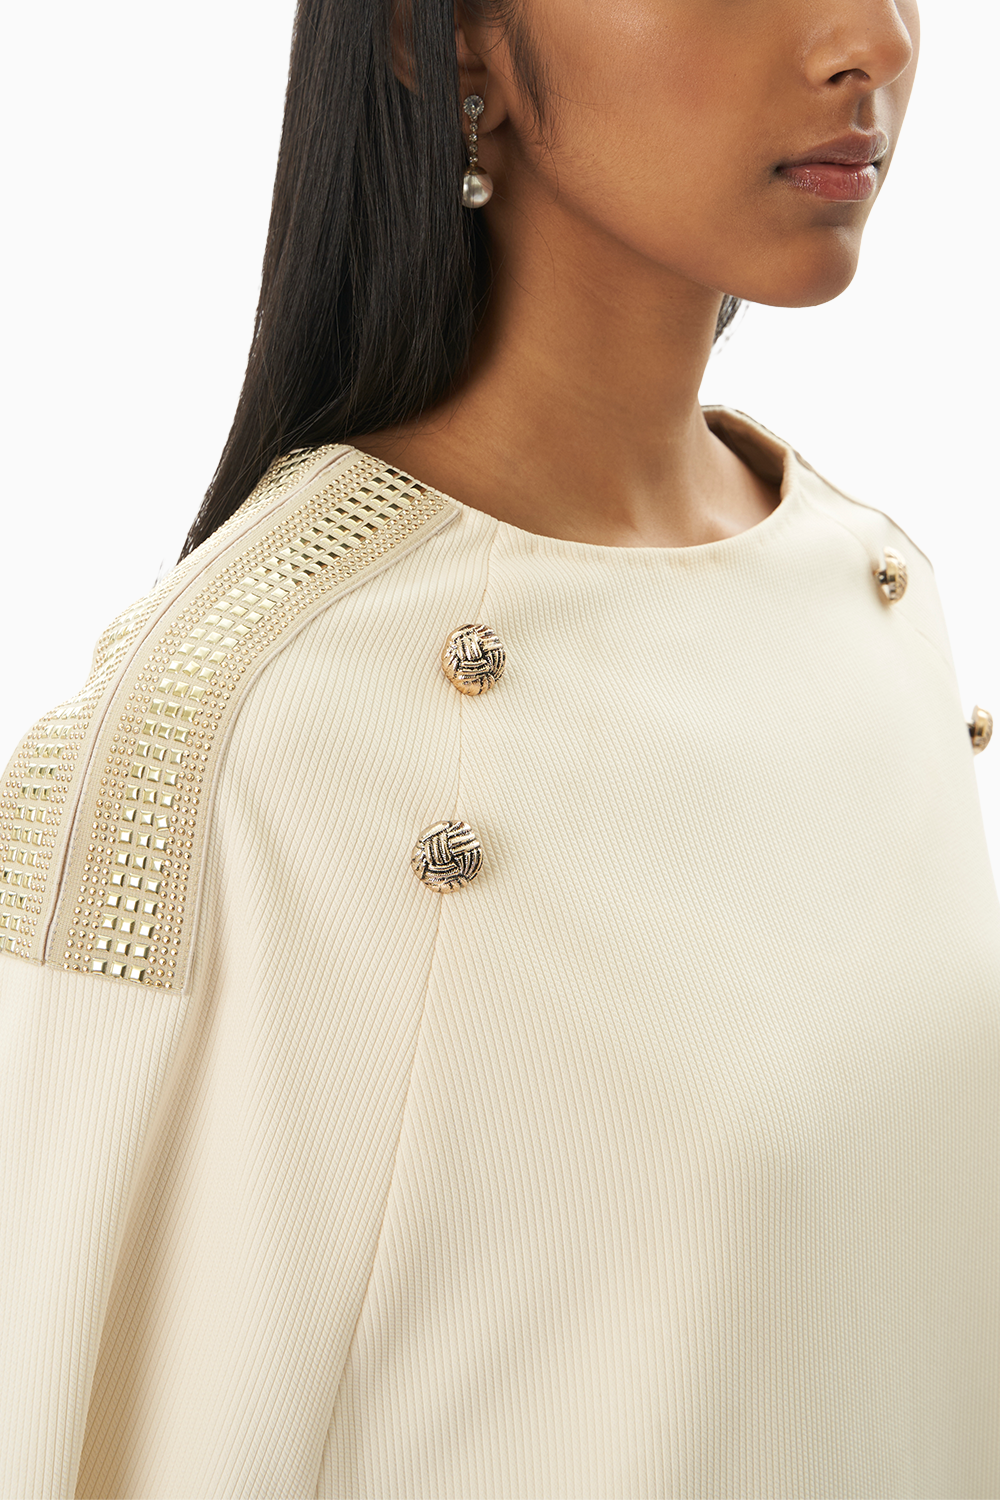 The White Rosewood Cape